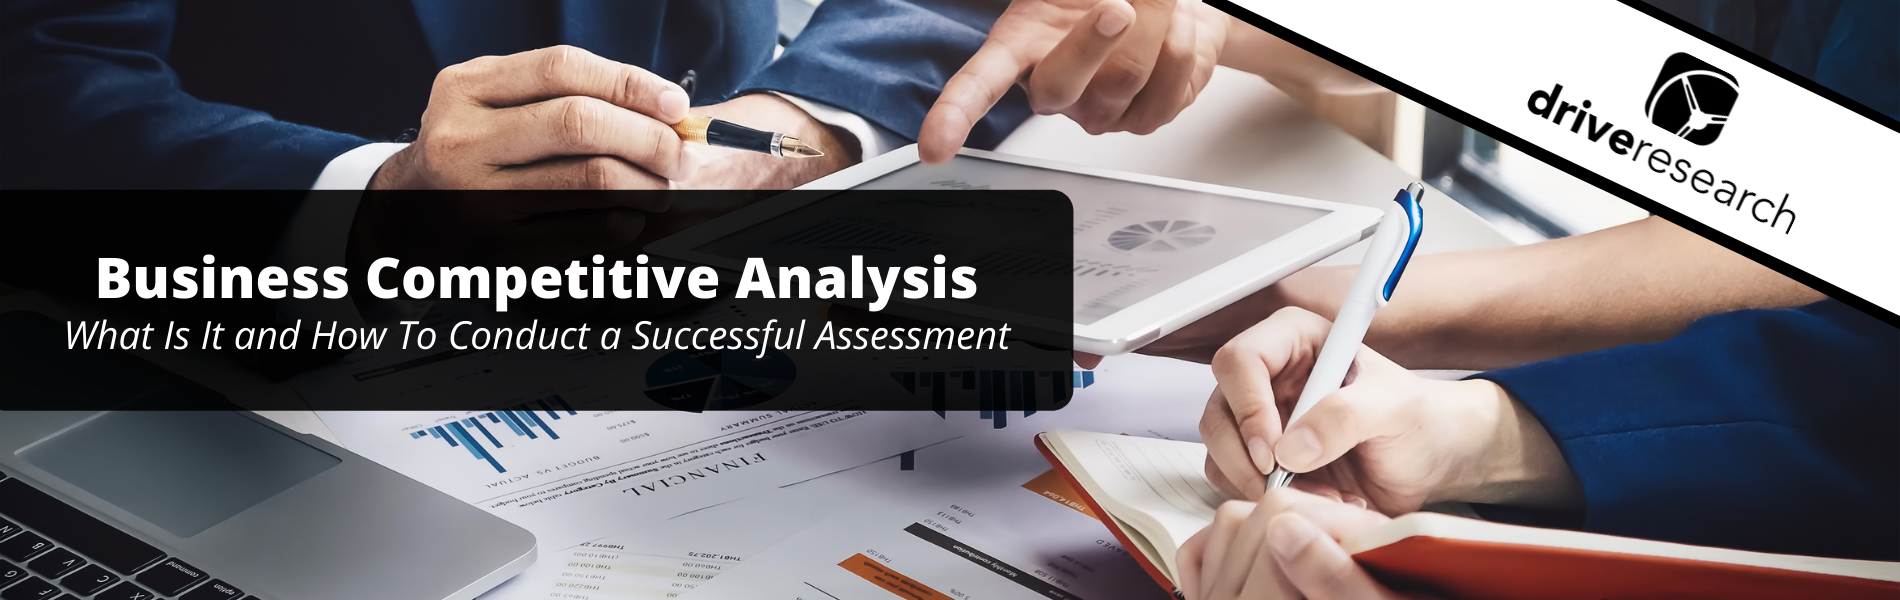 Business Competitive Analysis: What Is It and How To Conduct a Successful Assessment